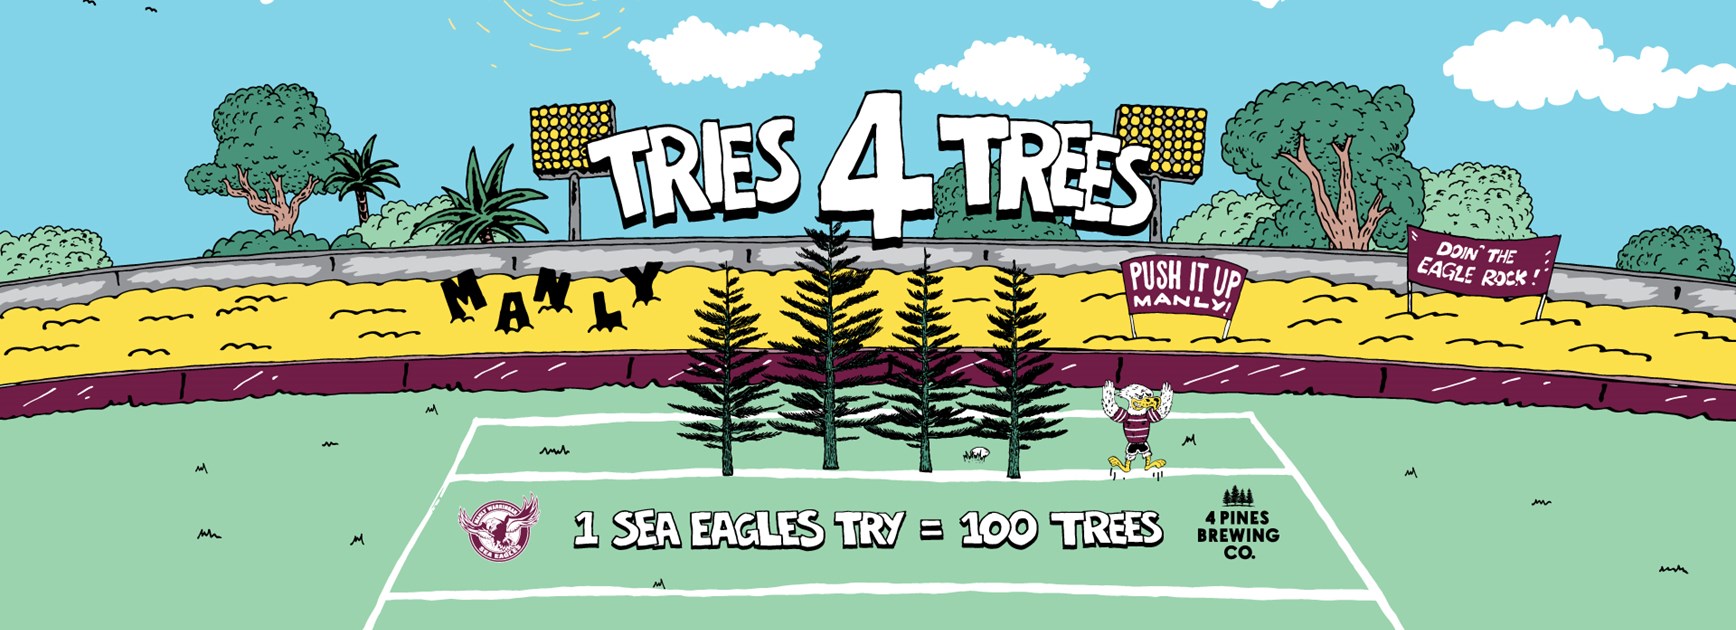 4 Pines Brewing Co. announces ‘Tries 4 Trees’ Initiative with Manly this NRL season